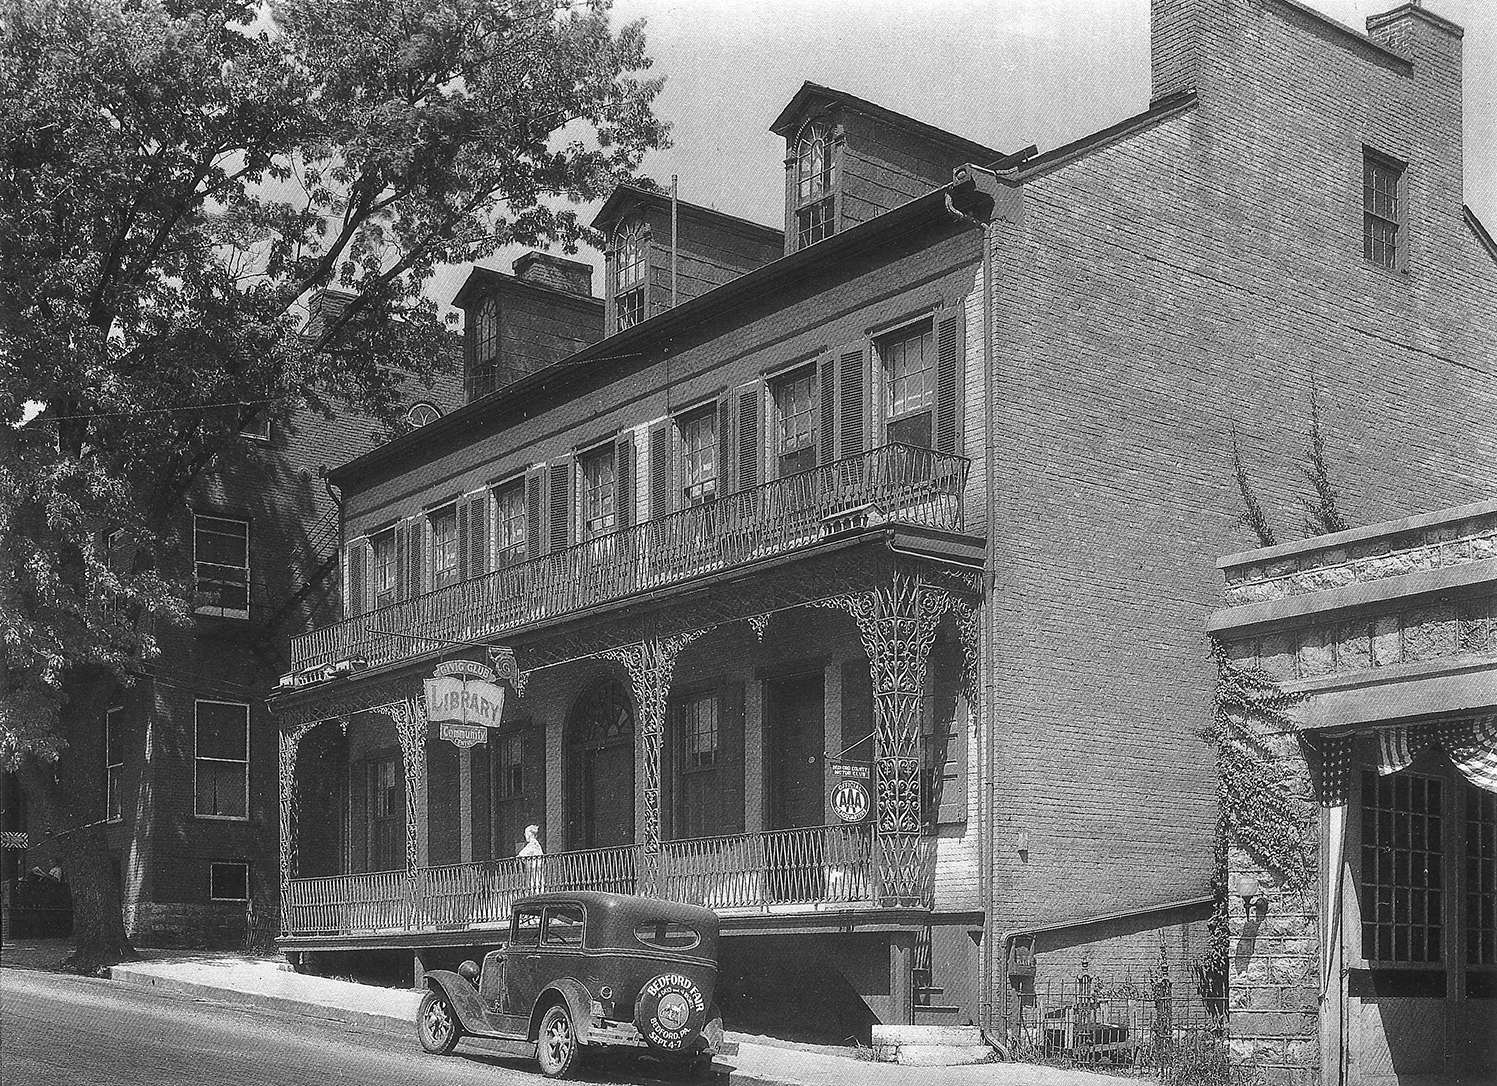 This black and white photograph shows the 1936 appearance of the Anderson House.